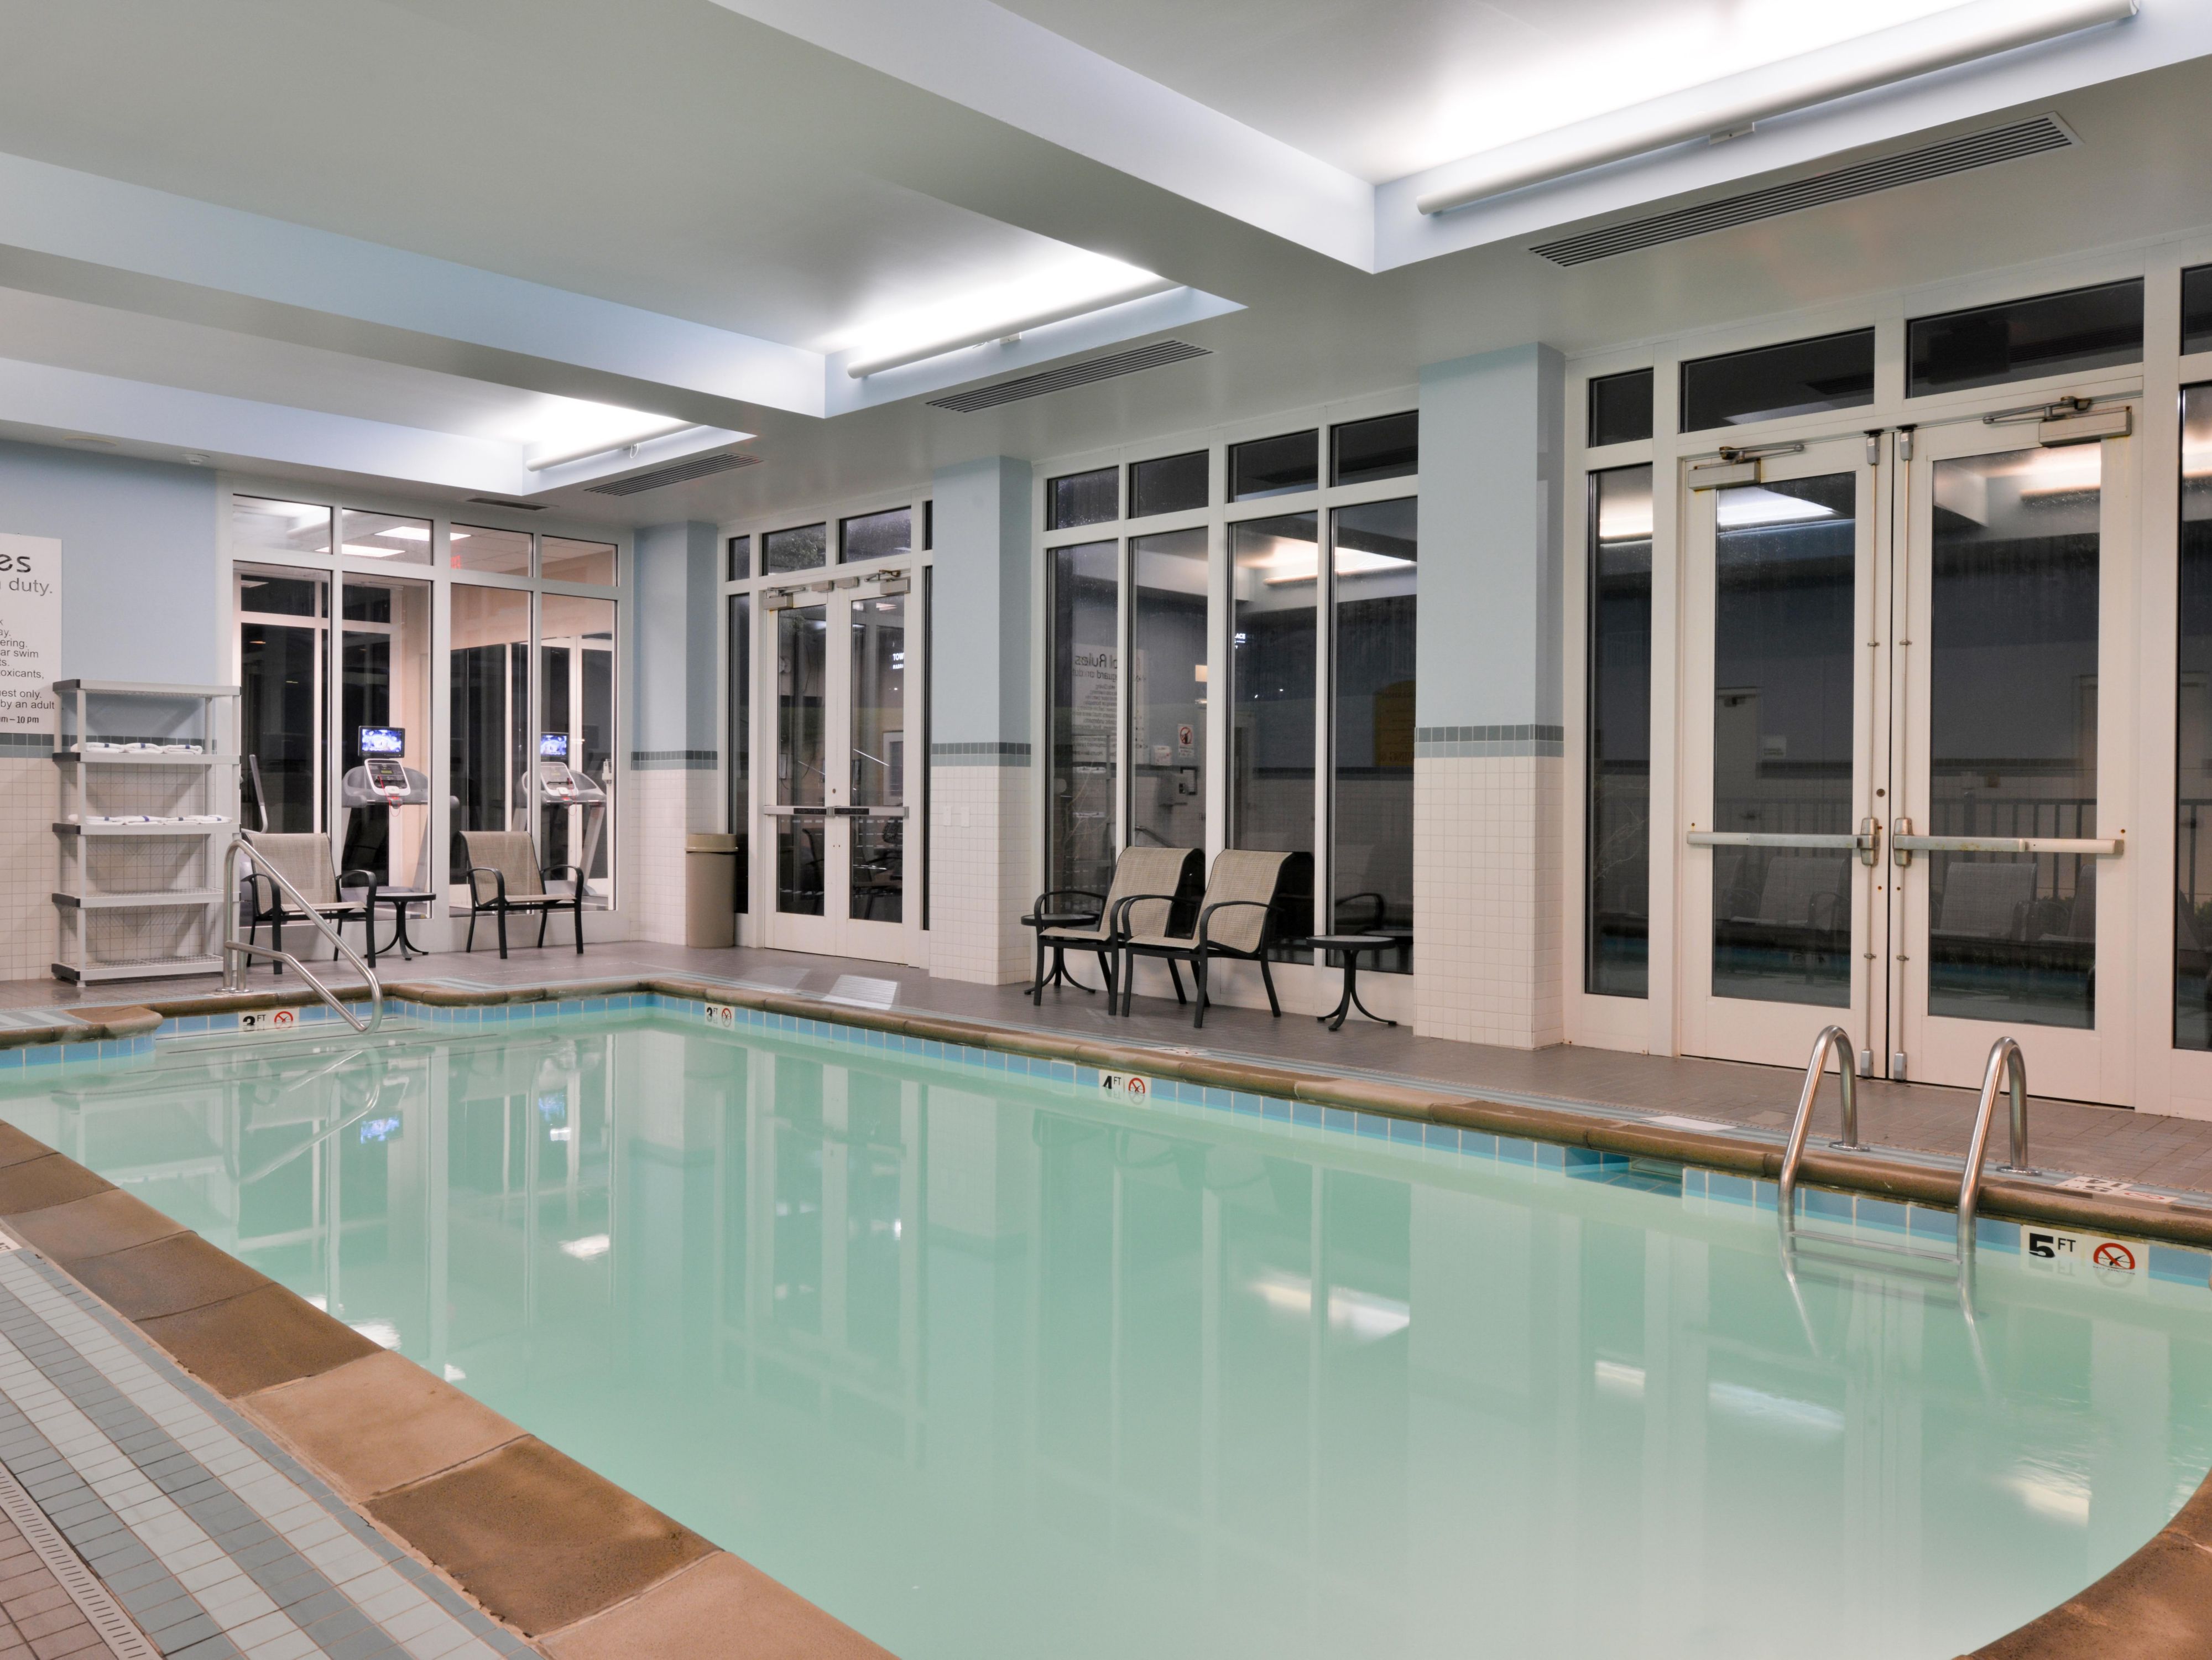 No matter the weather, our heated indoor pool is open! A great way to relax after a long flight, a day of shopping, or playing with the kids.